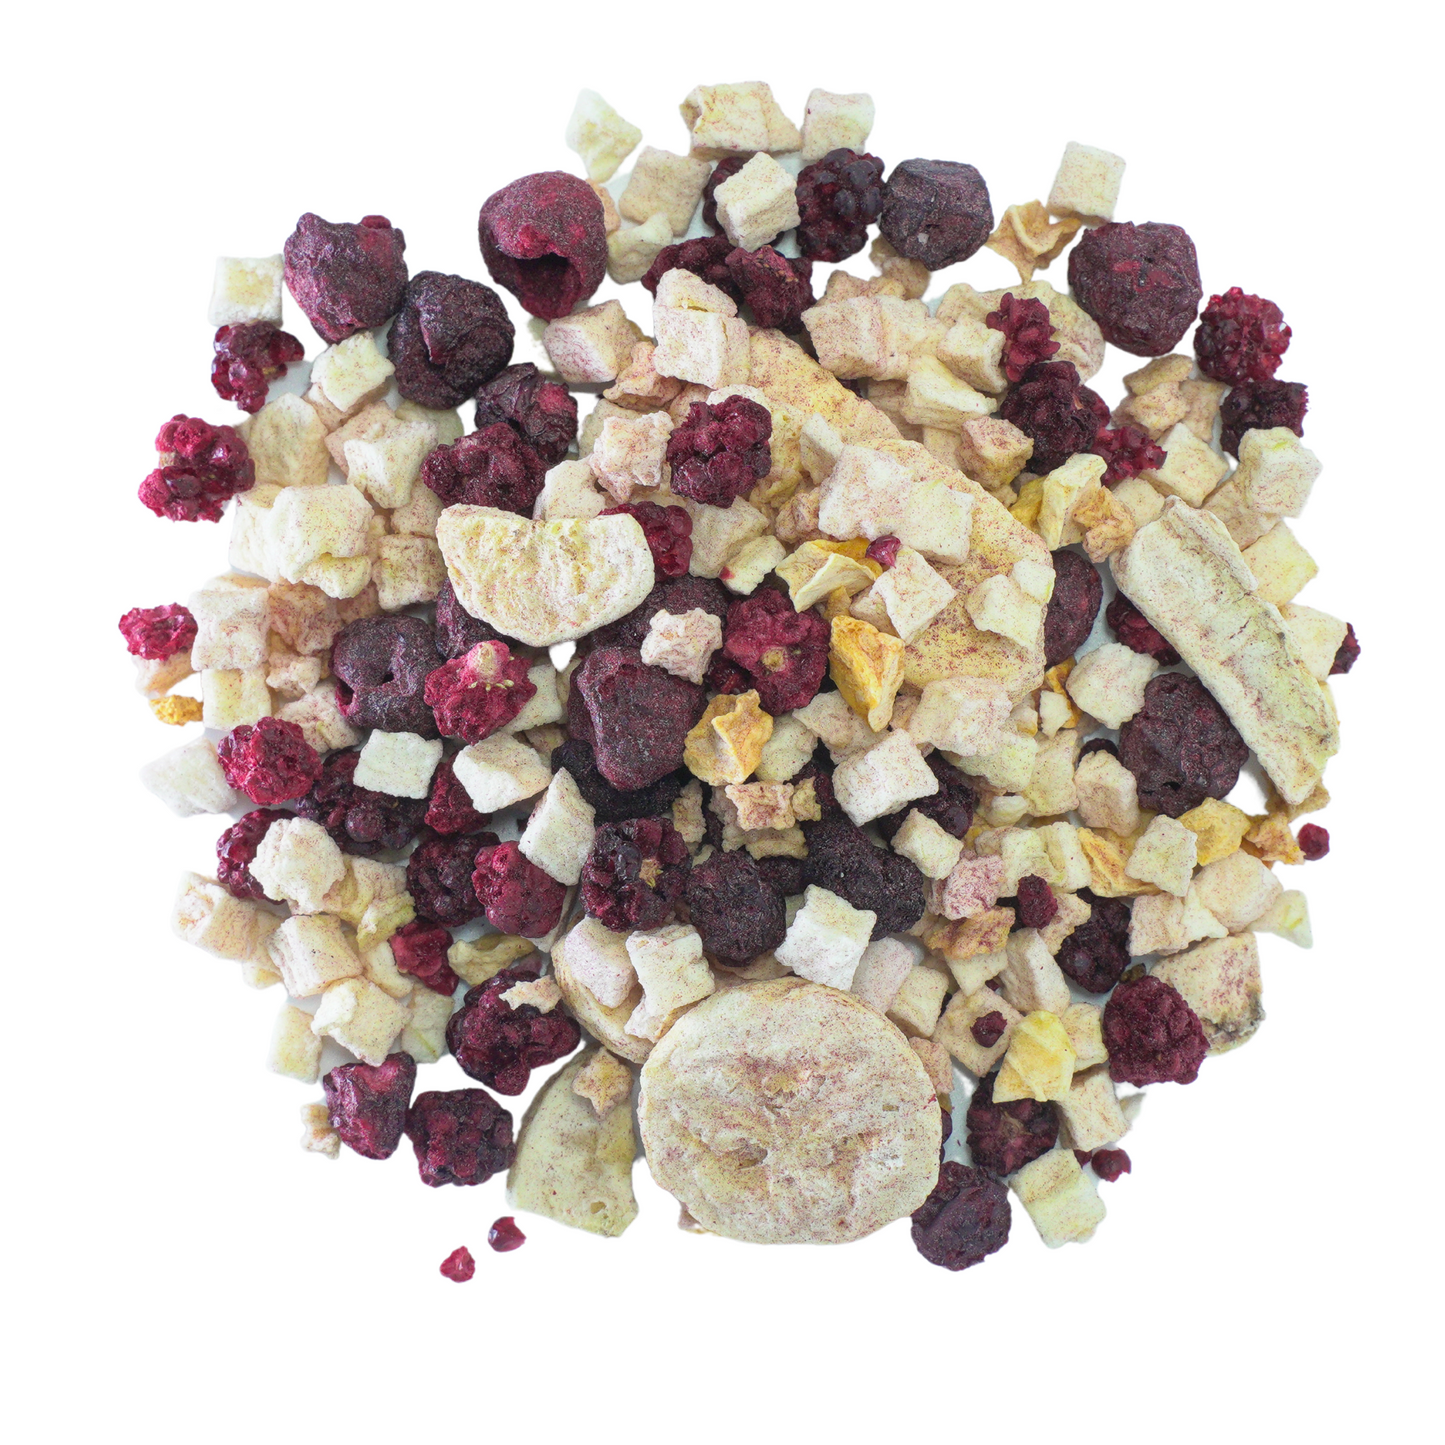 Fruity Flockers - Mixed freeze-dried fruit chop topper for parrots